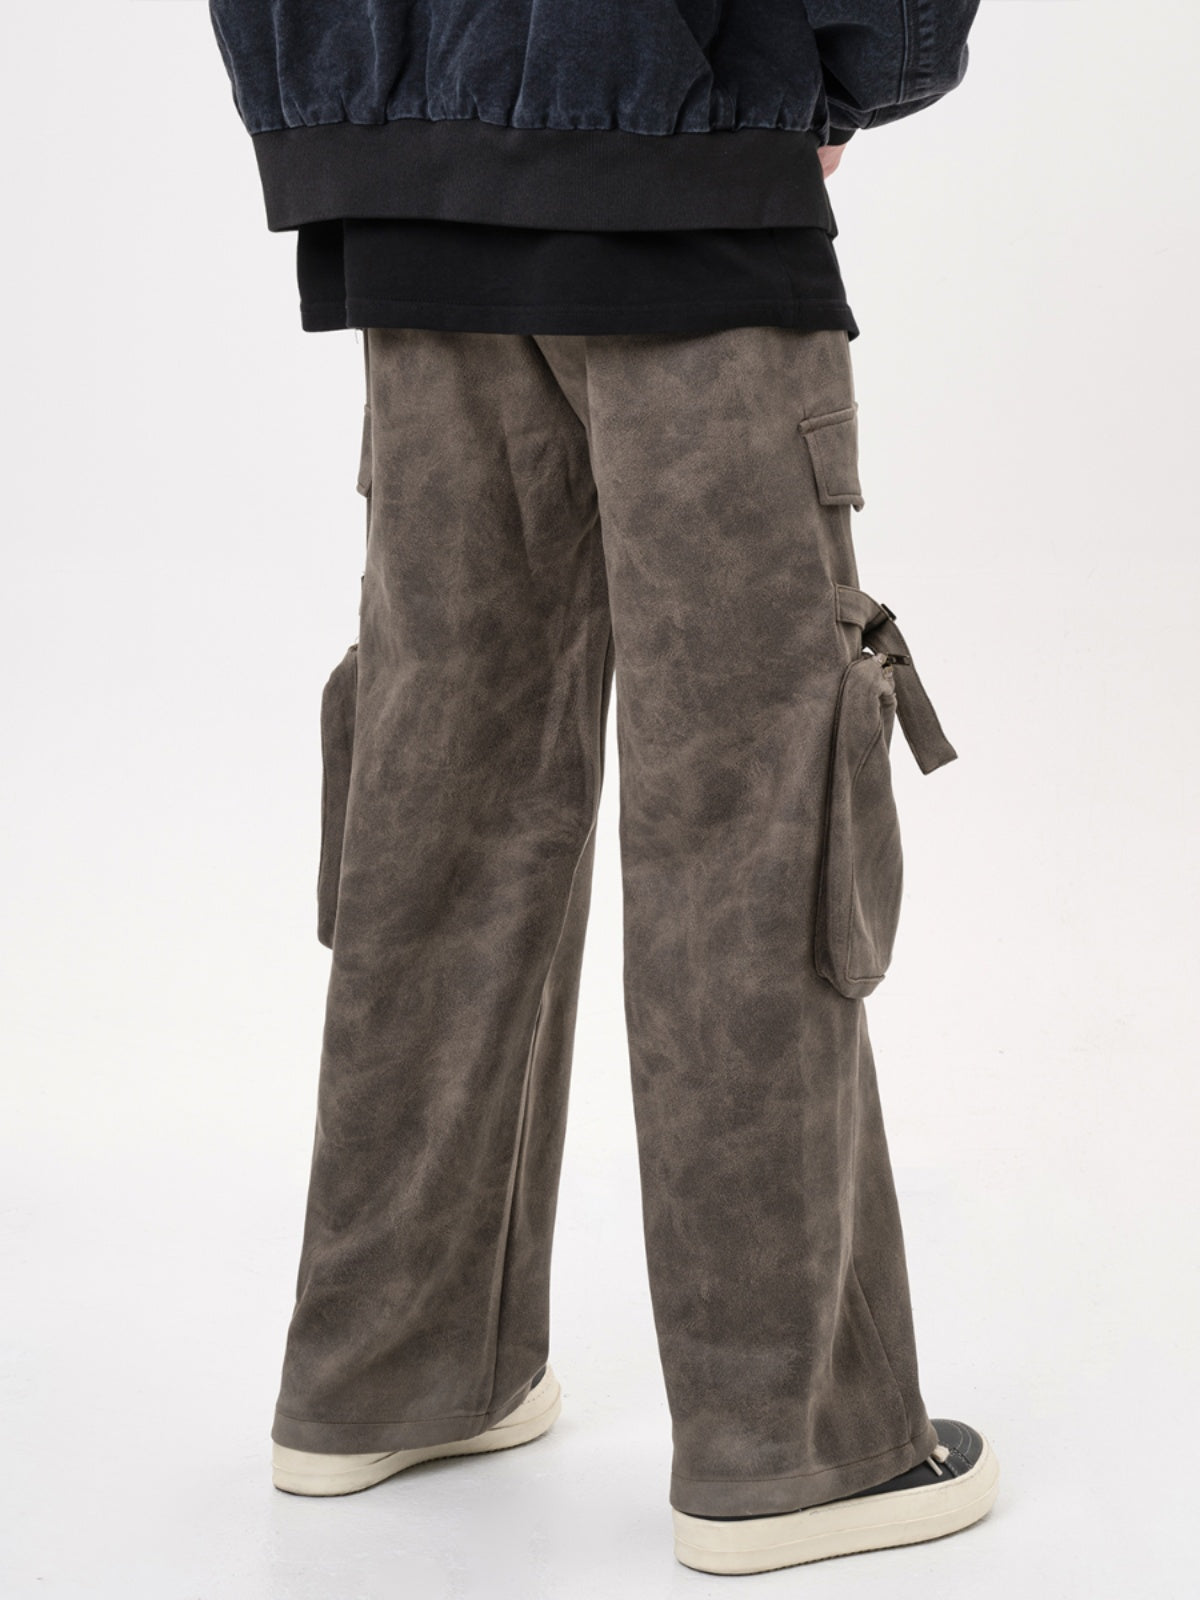 F3F Select Texture Suede Multi Pocket Work Cargo Pants